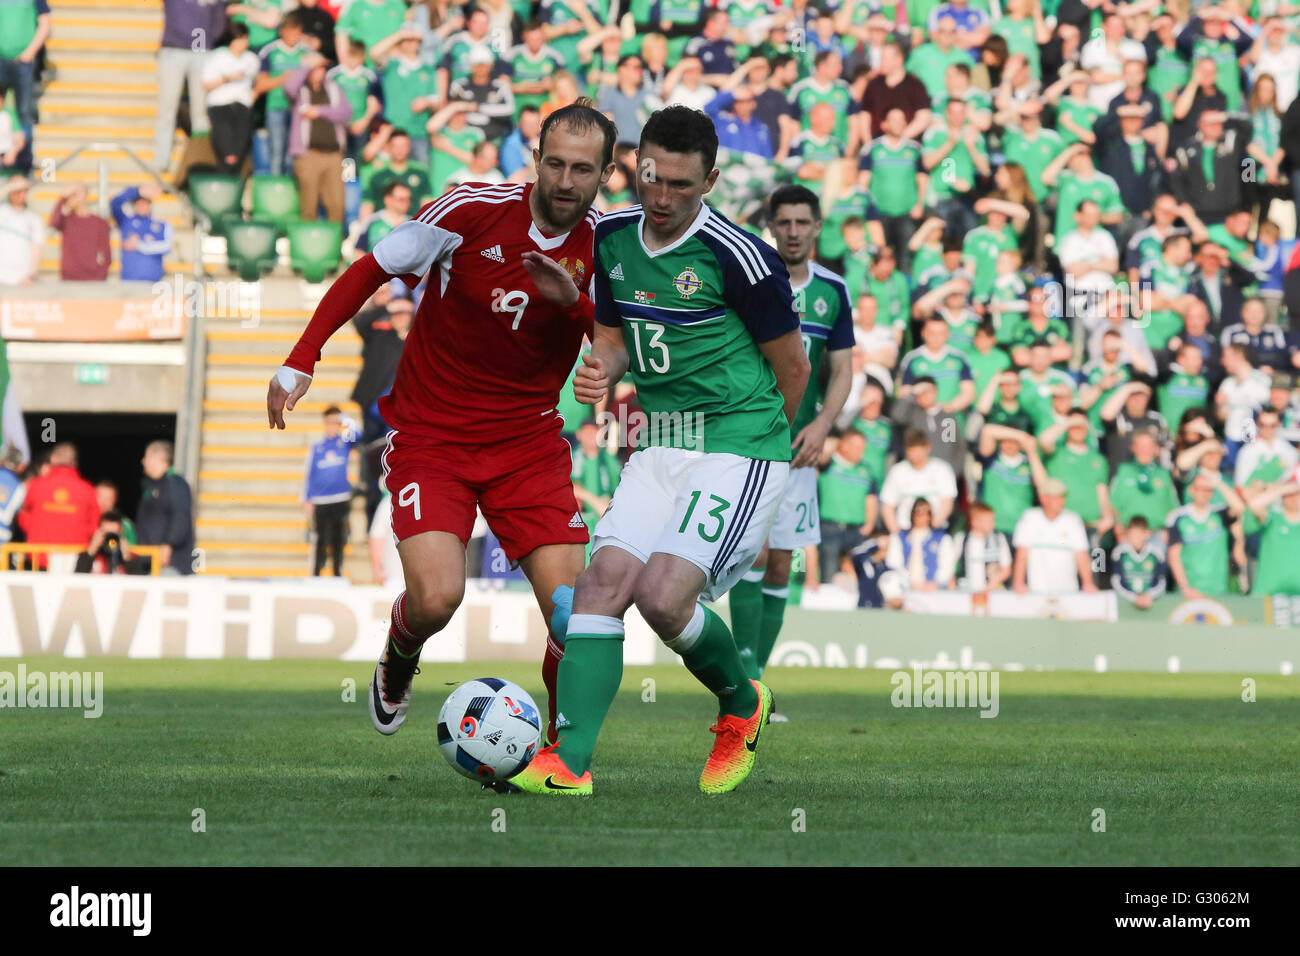 27th May 2016 - Vauxhall International Challenge (Friendly). Northern Ireland 3 Belarus 0. Northern Ireland's Corry Evans (13) and Belarus' Ihar Stasevich challenge for the ball. Stock Photo